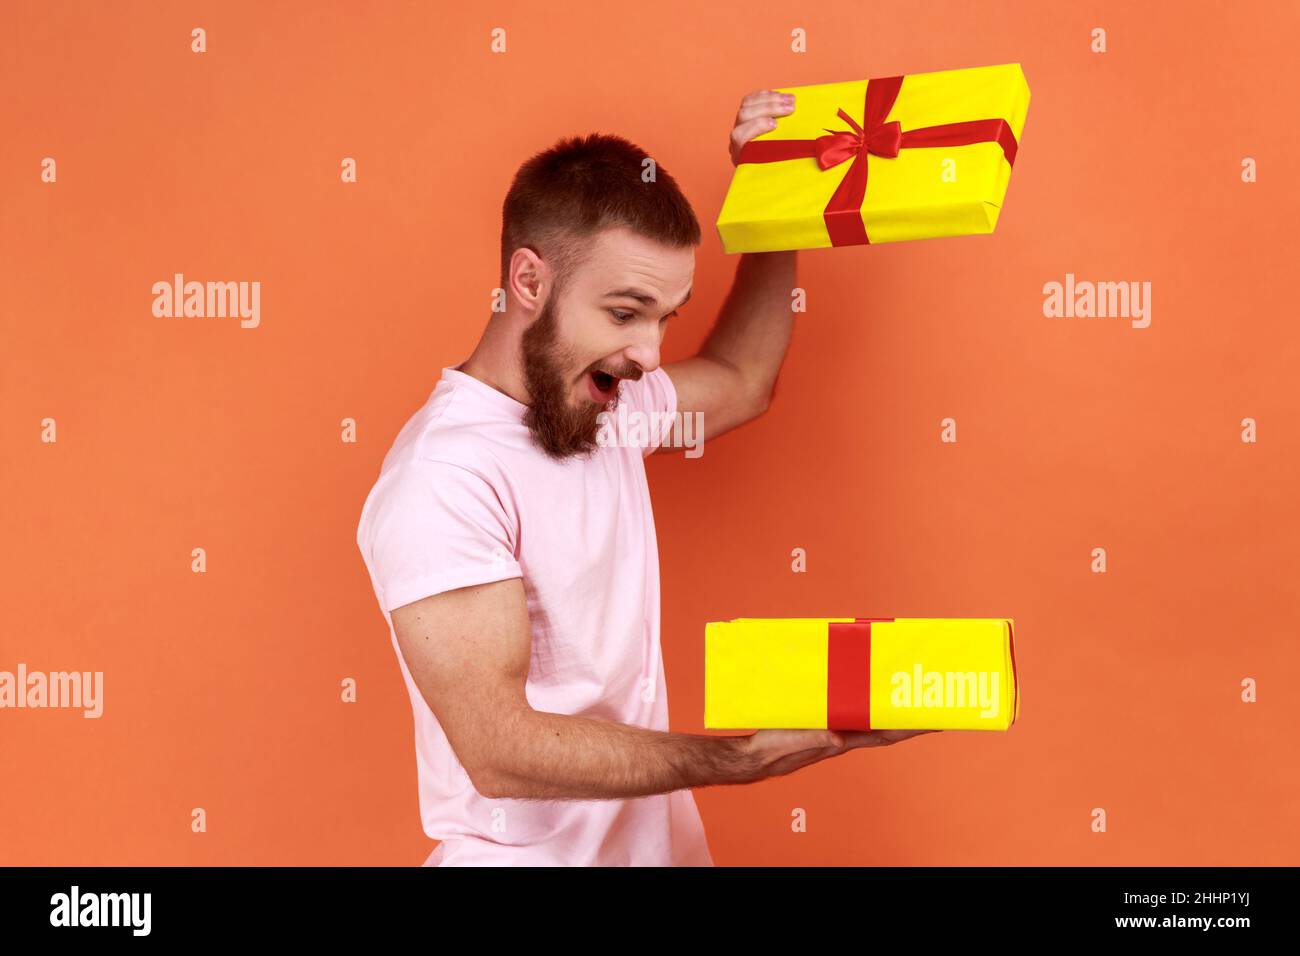 Portrait of handsome bearded man holding in hands unboxed gift, being satisfied with present, being extremely happy, wearing pink T-shirt. Indoor studio shot isolated on orange background. Stock Photo